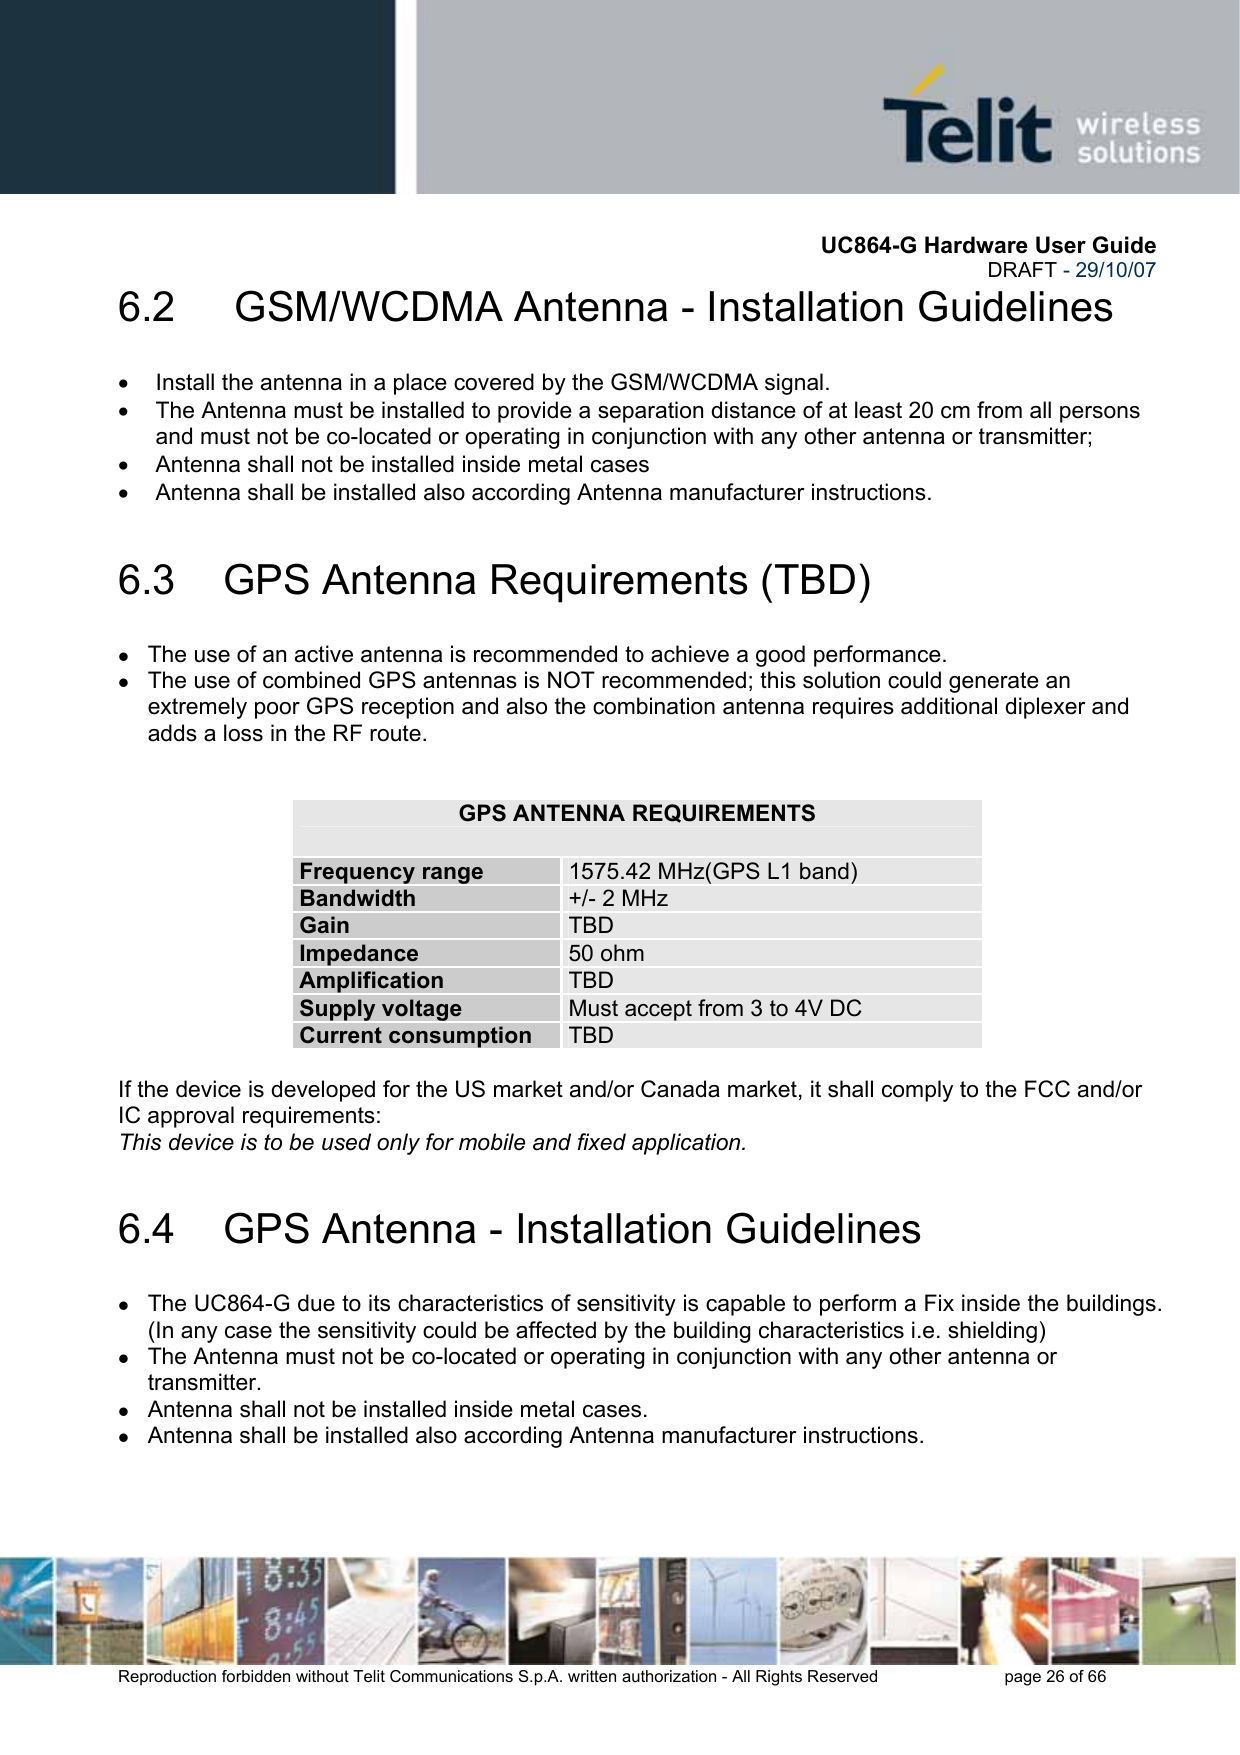       UC864-G Hardware User Guide  DRAFT - 29/10/07      Reproduction forbidden without Telit Communications S.p.A. written authorization - All Rights Reserved    page 26 of 66  6.2   GSM/WCDMA Antenna - Installation Guidelines •  Install the antenna in a place covered by the GSM/WCDMA signal. •  The Antenna must be installed to provide a separation distance of at least 20 cm from all persons and must not be co-located or operating in conjunction with any other antenna or transmitter; •  Antenna shall not be installed inside metal cases  •  Antenna shall be installed also according Antenna manufacturer instructions. 6.3  GPS Antenna Requirements (TBD) z The use of an active antenna is recommended to achieve a good performance. z The use of combined GPS antennas is NOT recommended; this solution could generate an extremely poor GPS reception and also the combination antenna requires additional diplexer and adds a loss in the RF route.   GPS ANTENNA REQUIREMENTS Frequency range  1575.42 MHz(GPS L1 band) Bandwidth  +/- 2 MHz Gain  TBD Impedance  50 ohm Amplification  TBD Supply voltage  Must accept from 3 to 4V DC Current consumption  TBD  If the device is developed for the US market and/or Canada market, it shall comply to the FCC and/or IC approval requirements: This device is to be used only for mobile and fixed application. 6.4  GPS Antenna - Installation Guidelines z The UC864-G due to its characteristics of sensitivity is capable to perform a Fix inside the buildings. (In any case the sensitivity could be affected by the building characteristics i.e. shielding) z The Antenna must not be co-located or operating in conjunction with any other antenna or transmitter. z Antenna shall not be installed inside metal cases. z Antenna shall be installed also according Antenna manufacturer instructions. 